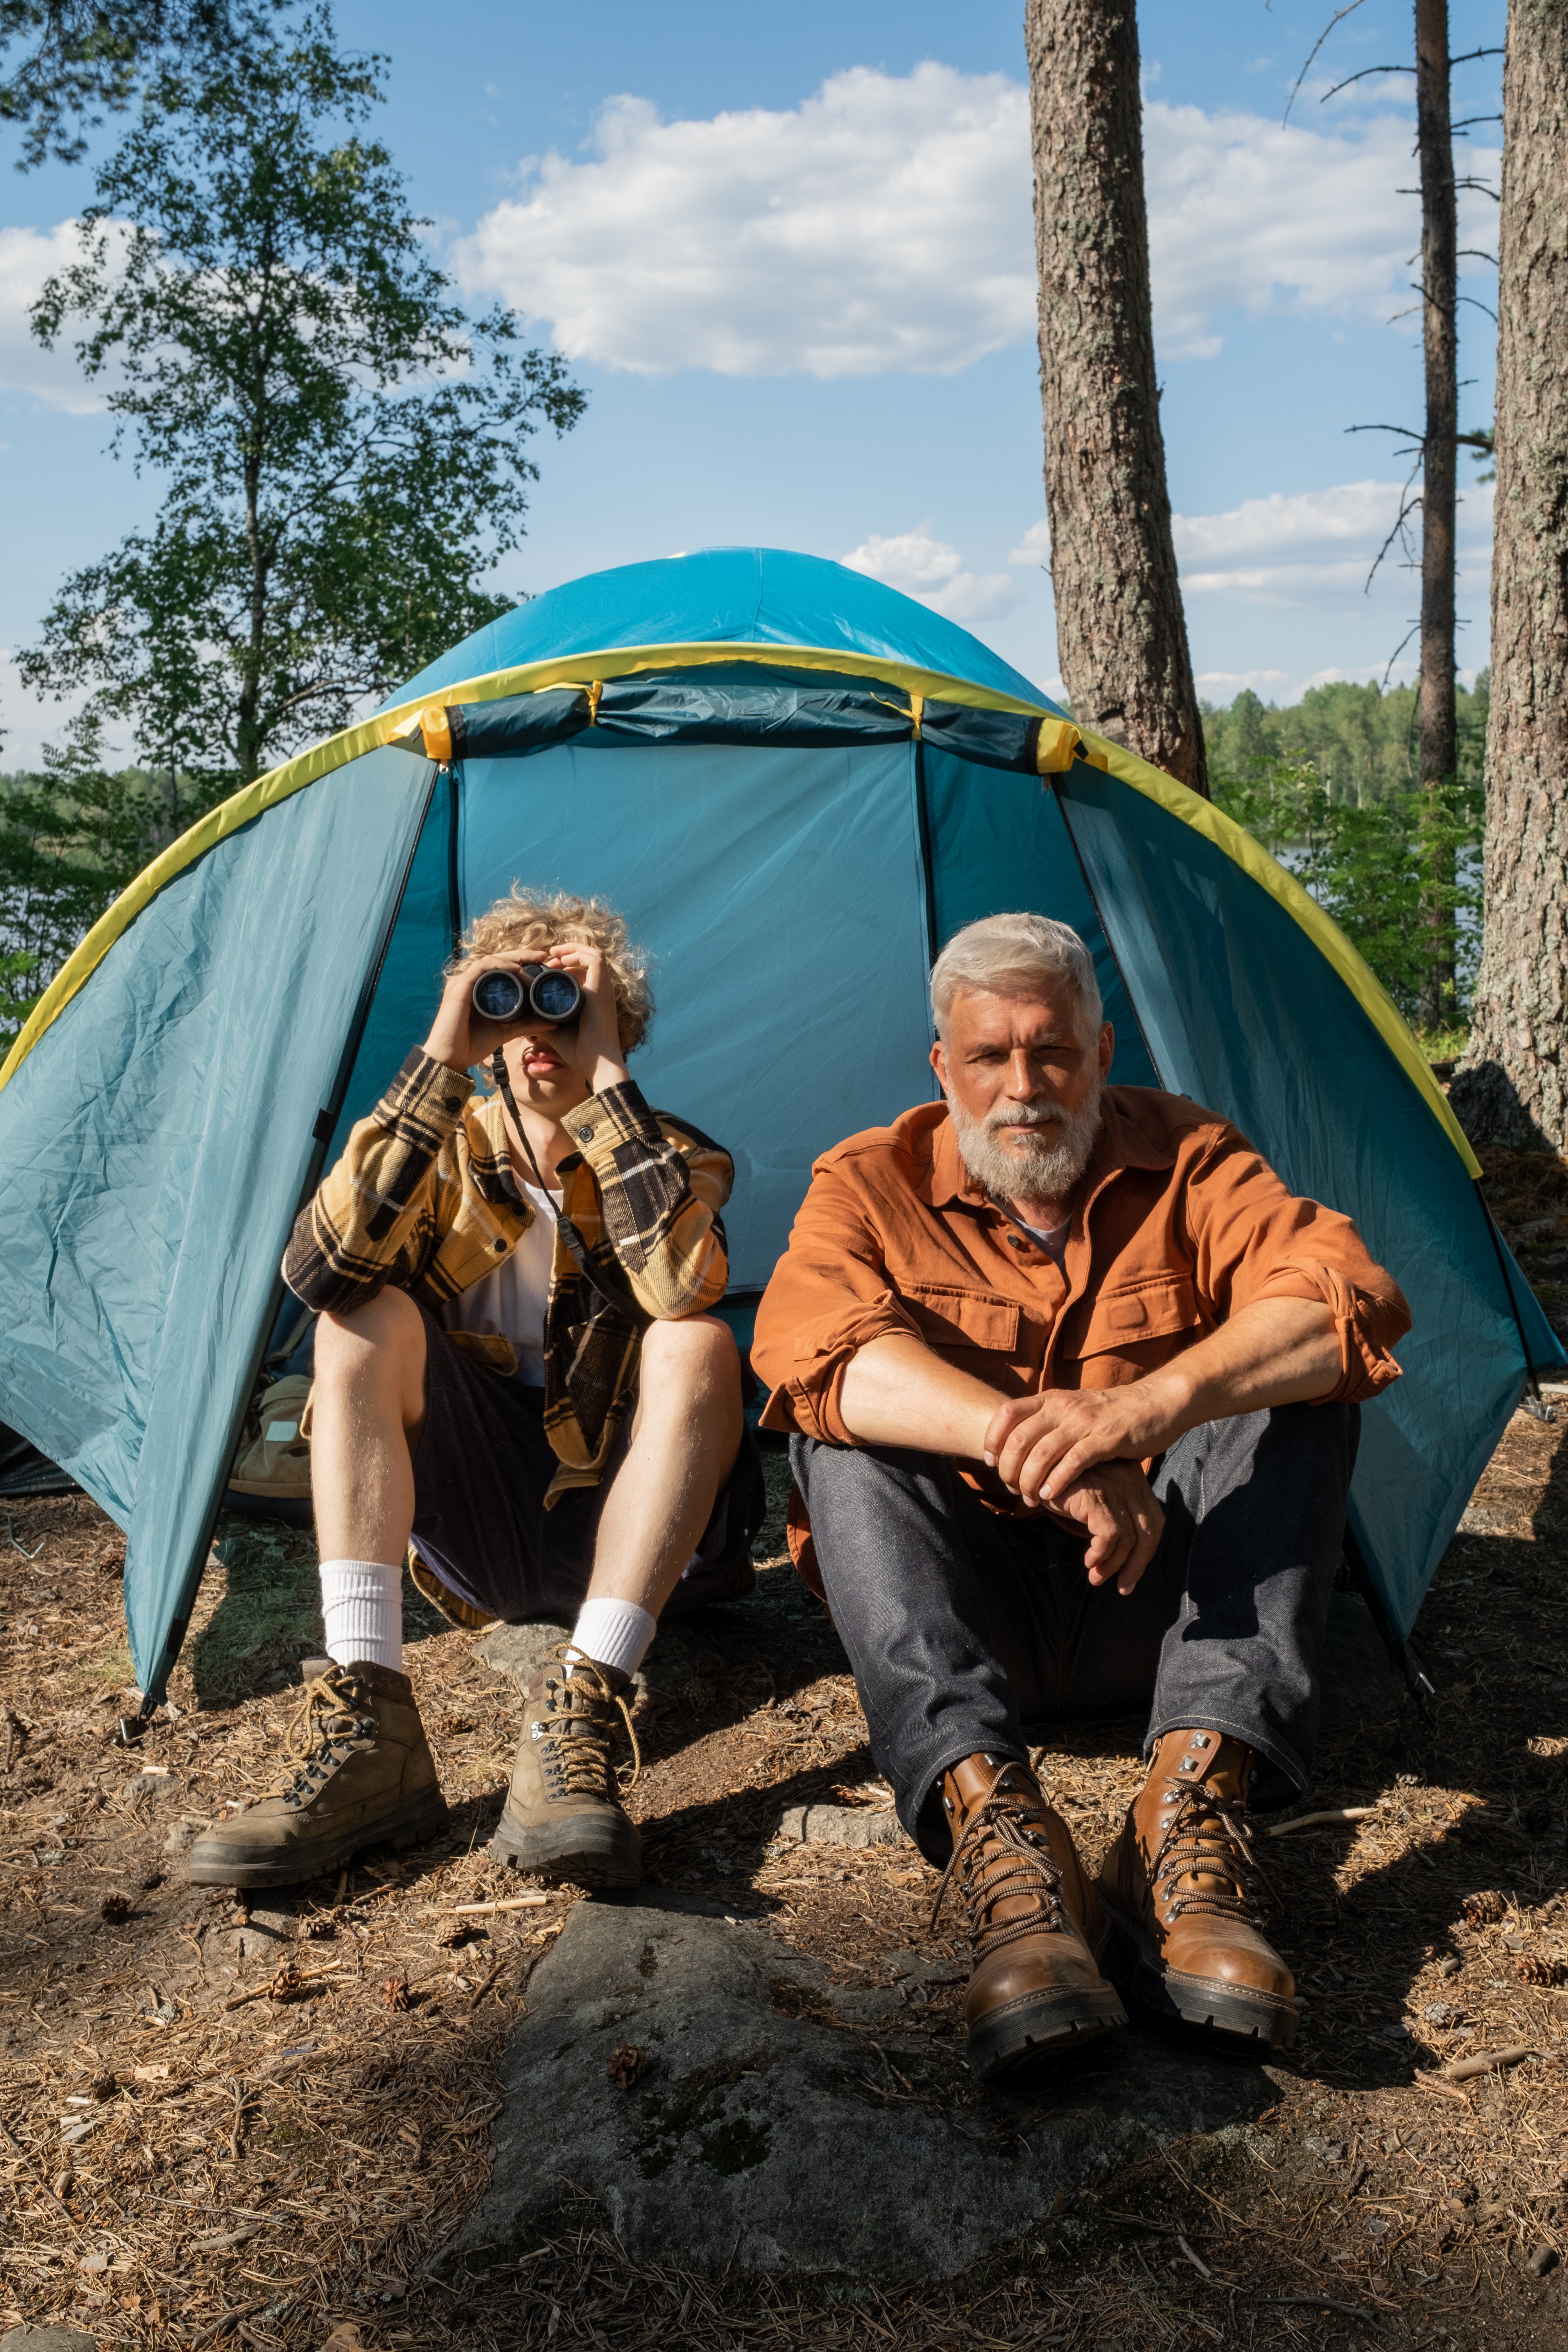 A camping trip can help to relieve worry about son's apathy.